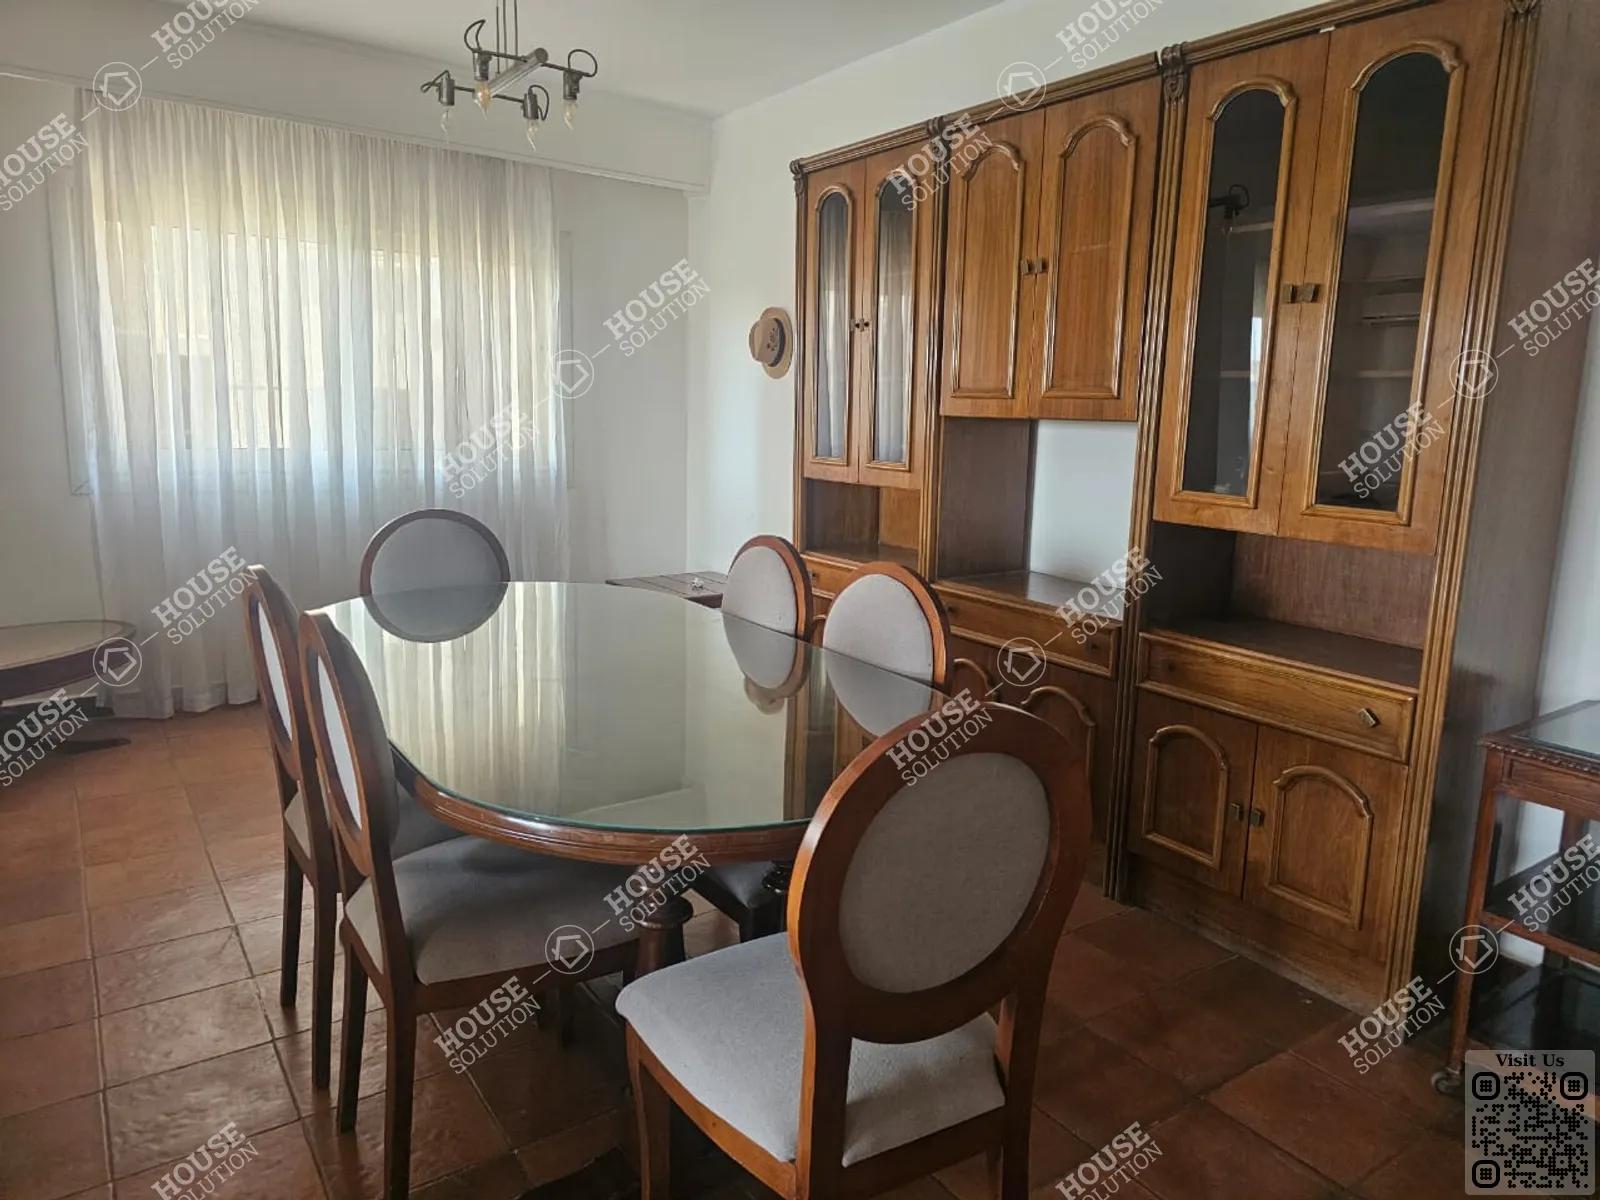 DINING AREA @ Apartments For Rent In Maadi Maadi Degla Area: 145 m² consists of 3 Bedrooms 2 Bathrooms Furnished 5 stars #5909-2